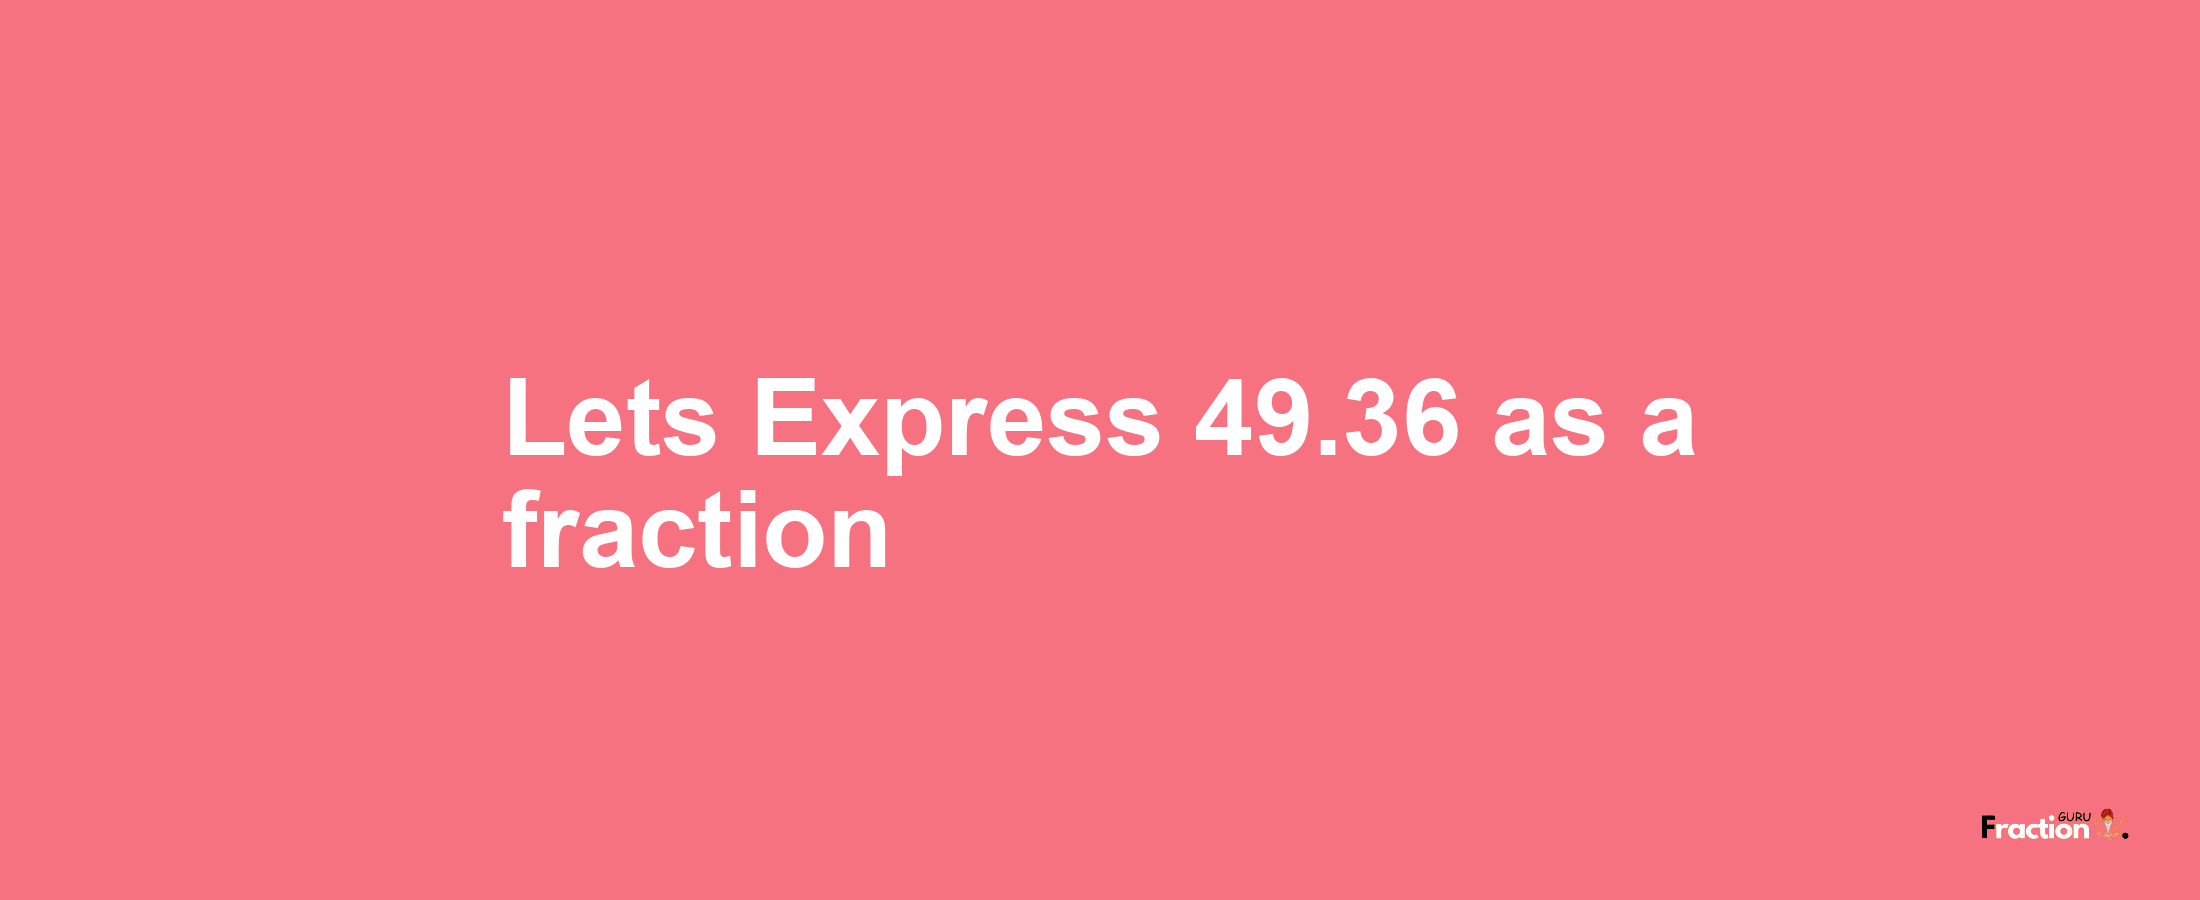 Lets Express 49.36 as afraction